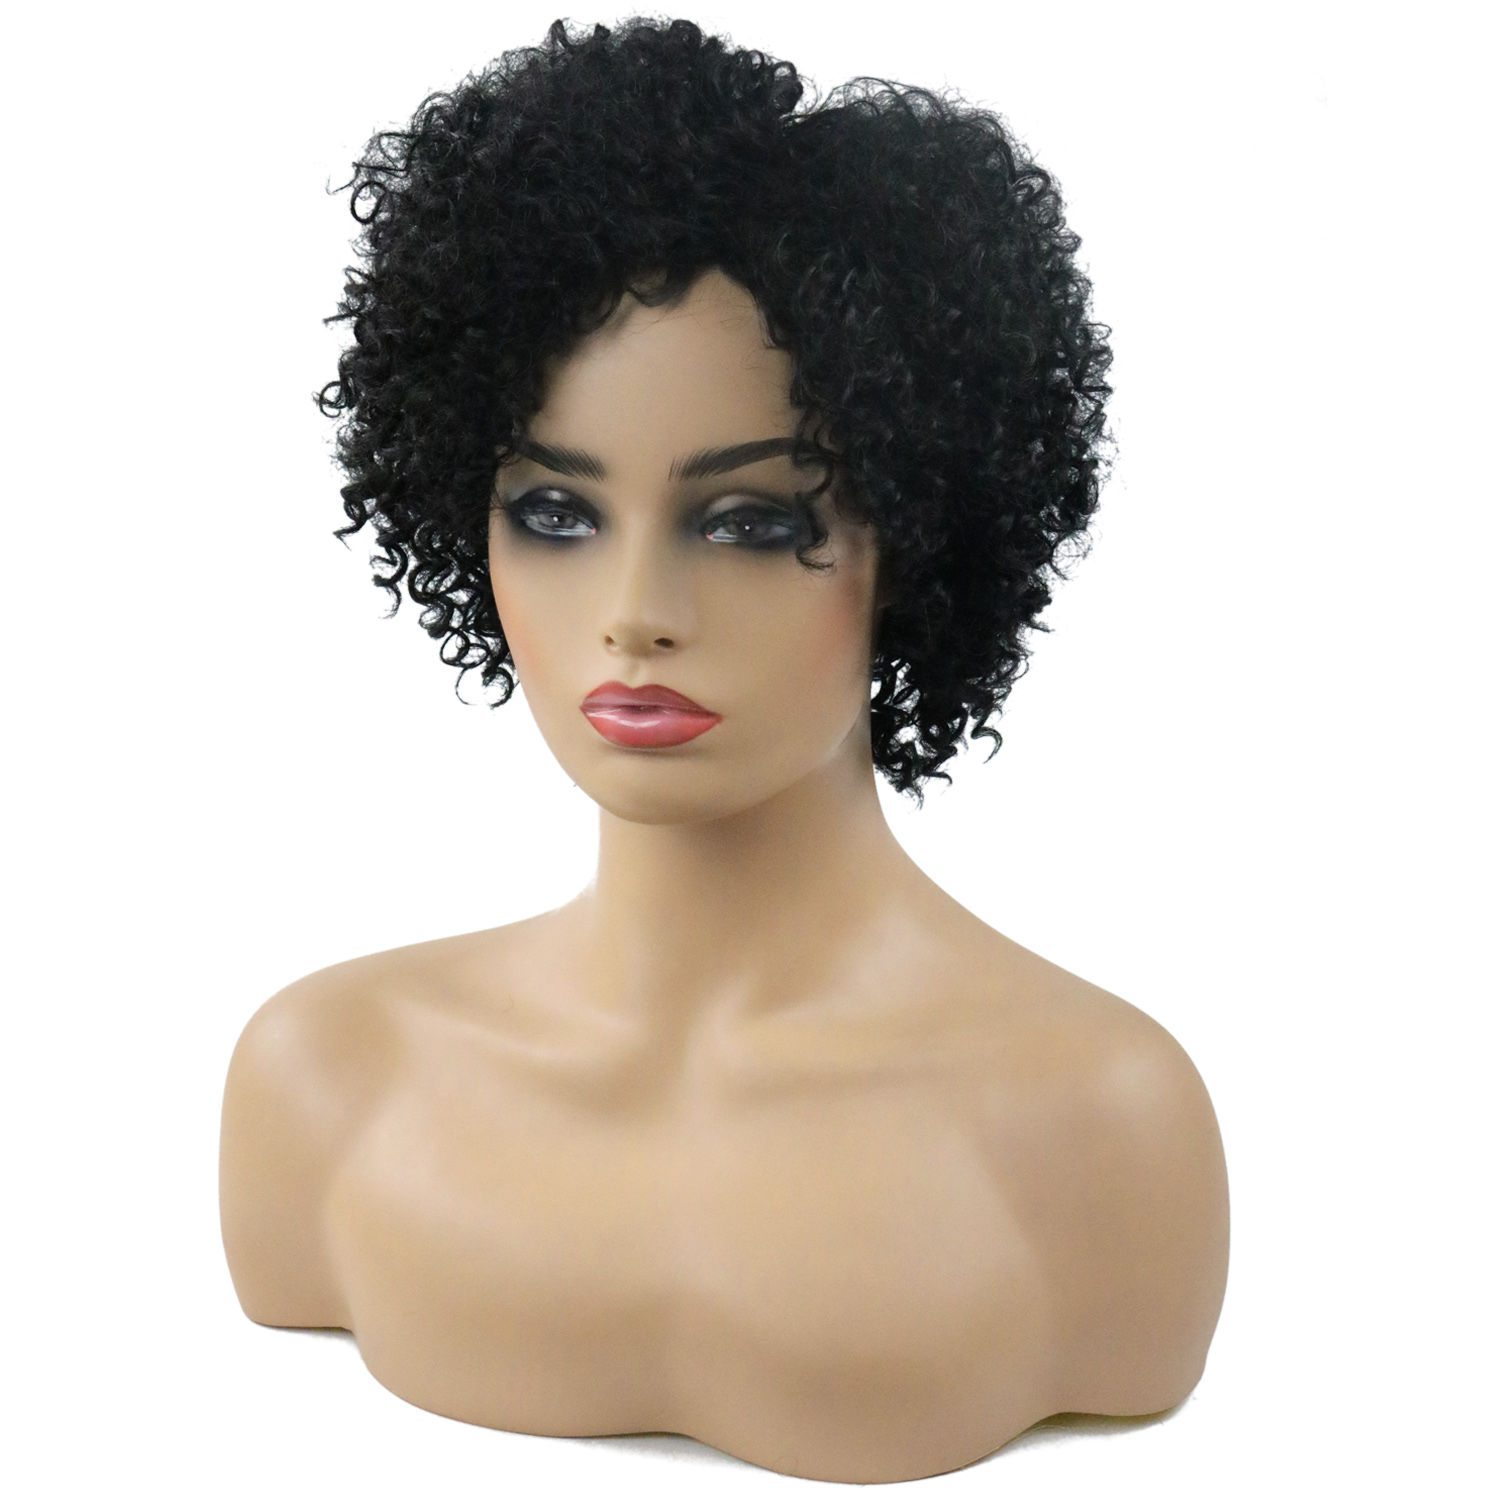 Kinky Curly Medium Synthetic Hair African American For Black Women Wig